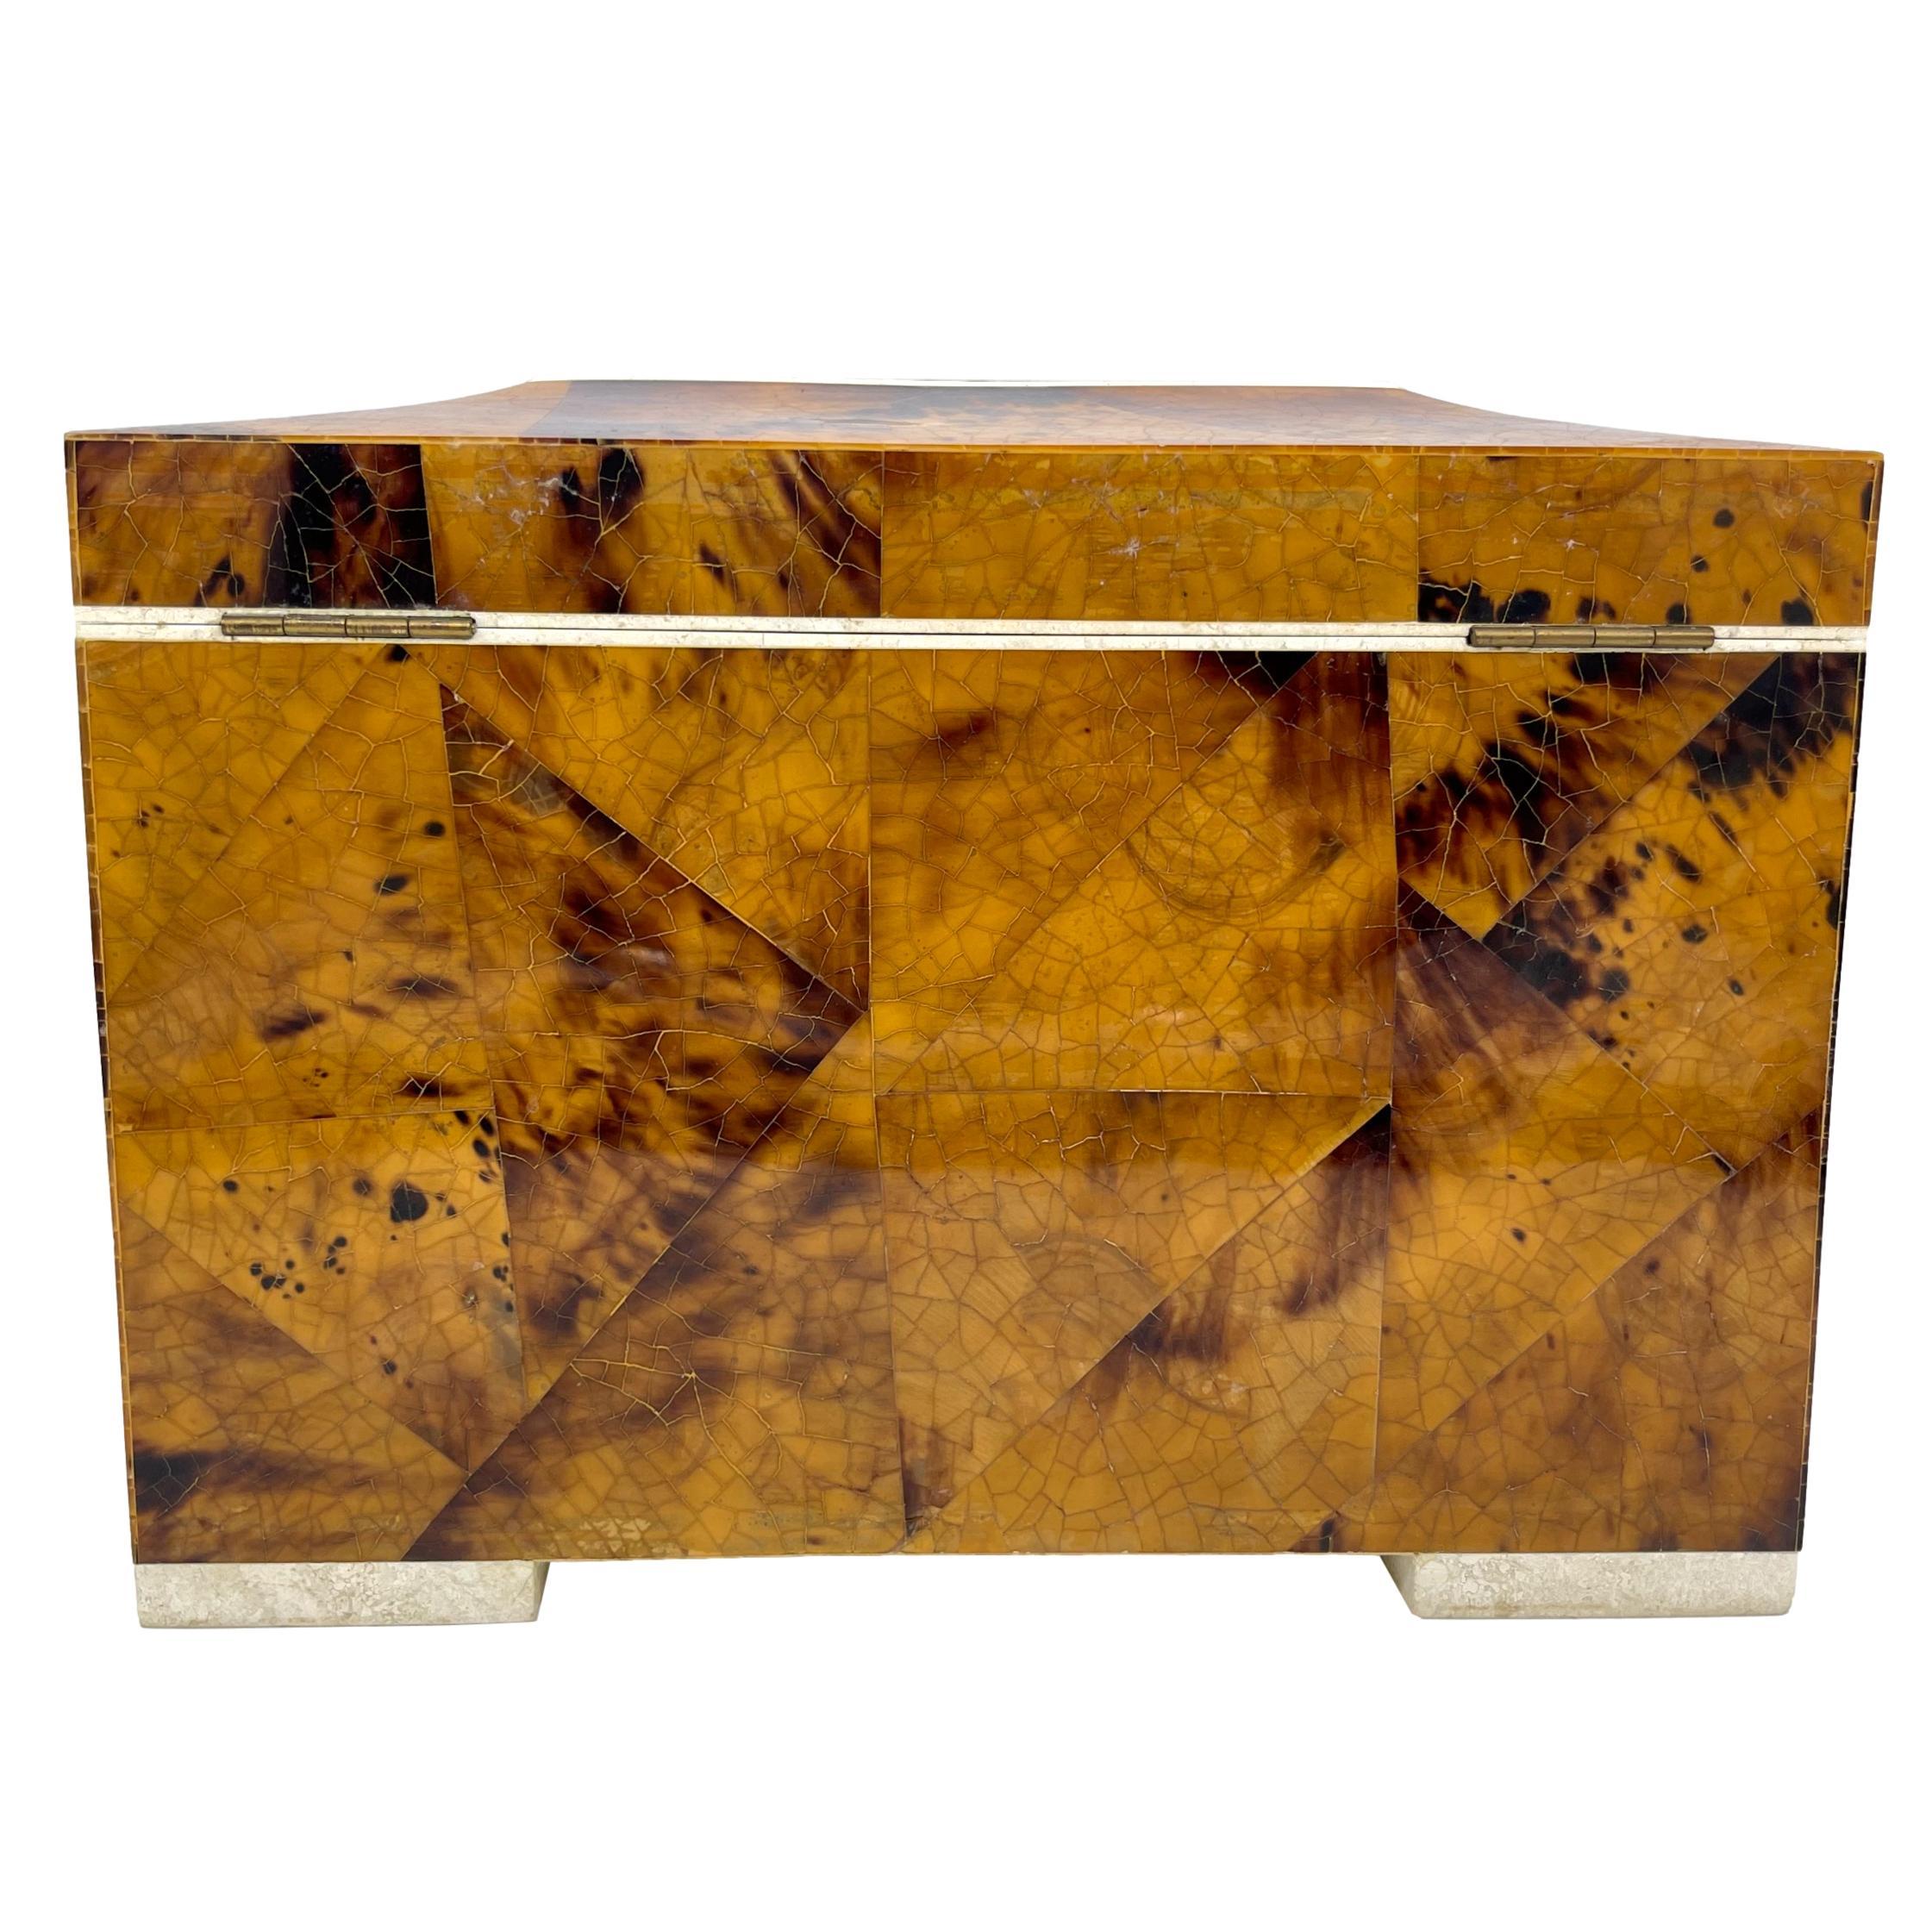 20th Century Mid-Century Modern Tessellated Horn & Stone Large Box, Tavola by Oggetti For Sale